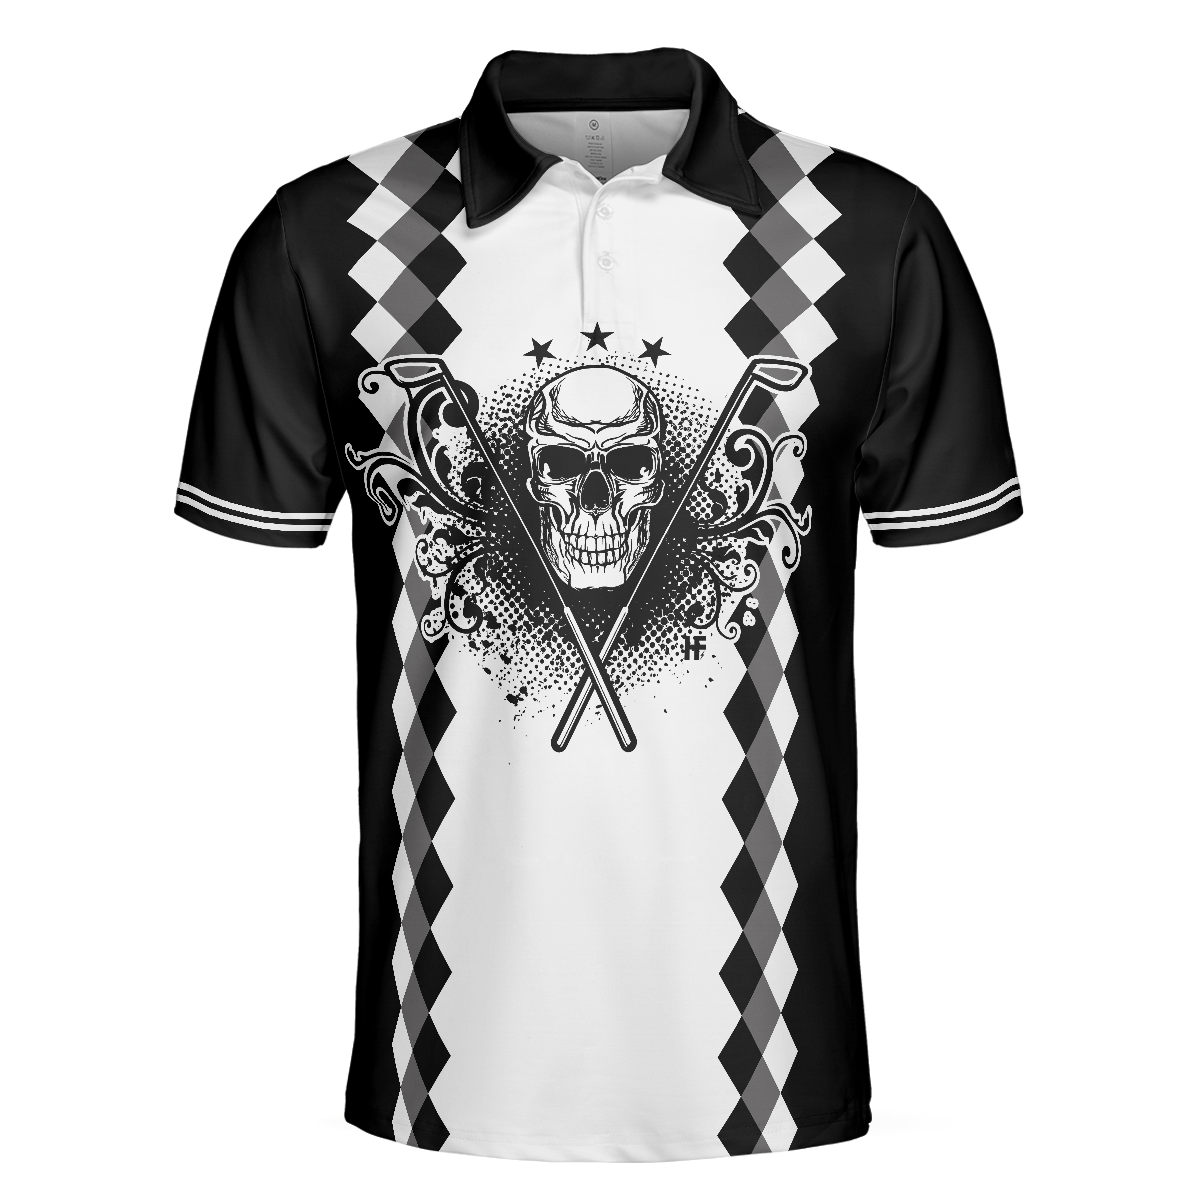 Grandpa Is My Name Golf Is My Game Golf Polo Shirt Black And White Argyle Pattern Golf Shirt For Men - 3